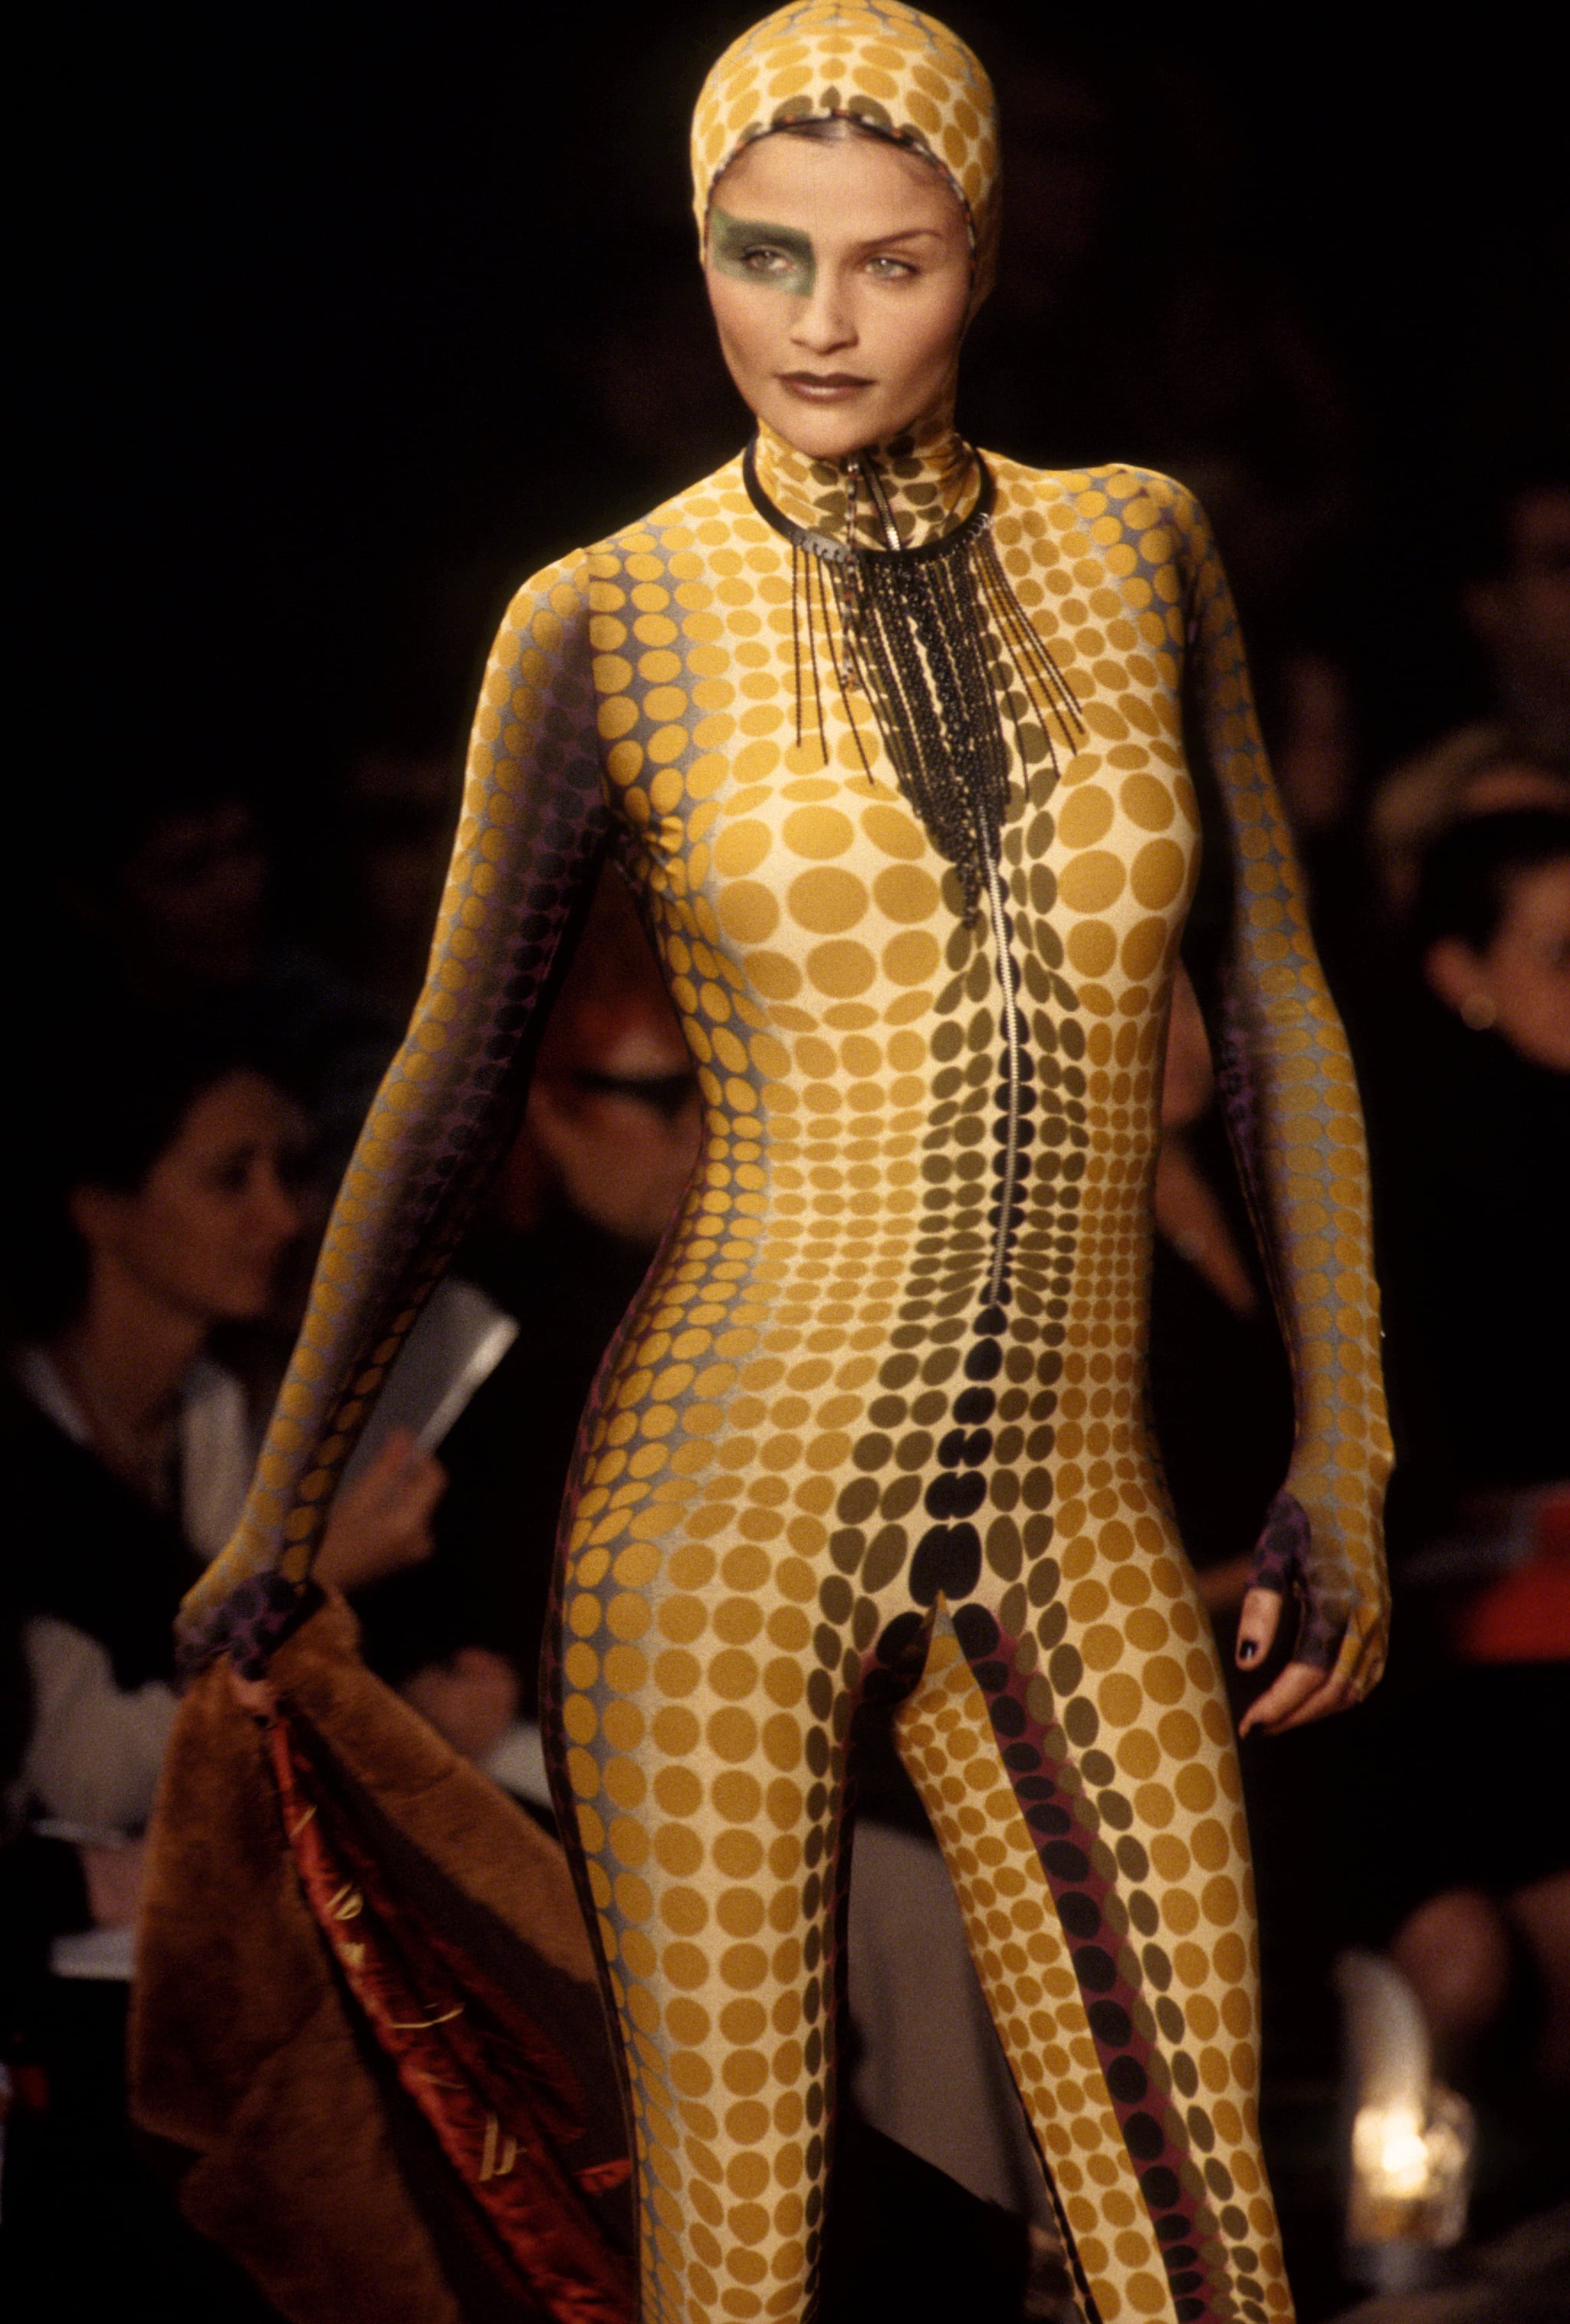 PARIS, FRANCE - CIRCA 1995: Helena Christensen at  the Jean Paul Gaultier Fall 1995 show circa 1995 in Paris, France. (Photo by PL Gould/IMAGES/Getty Images)